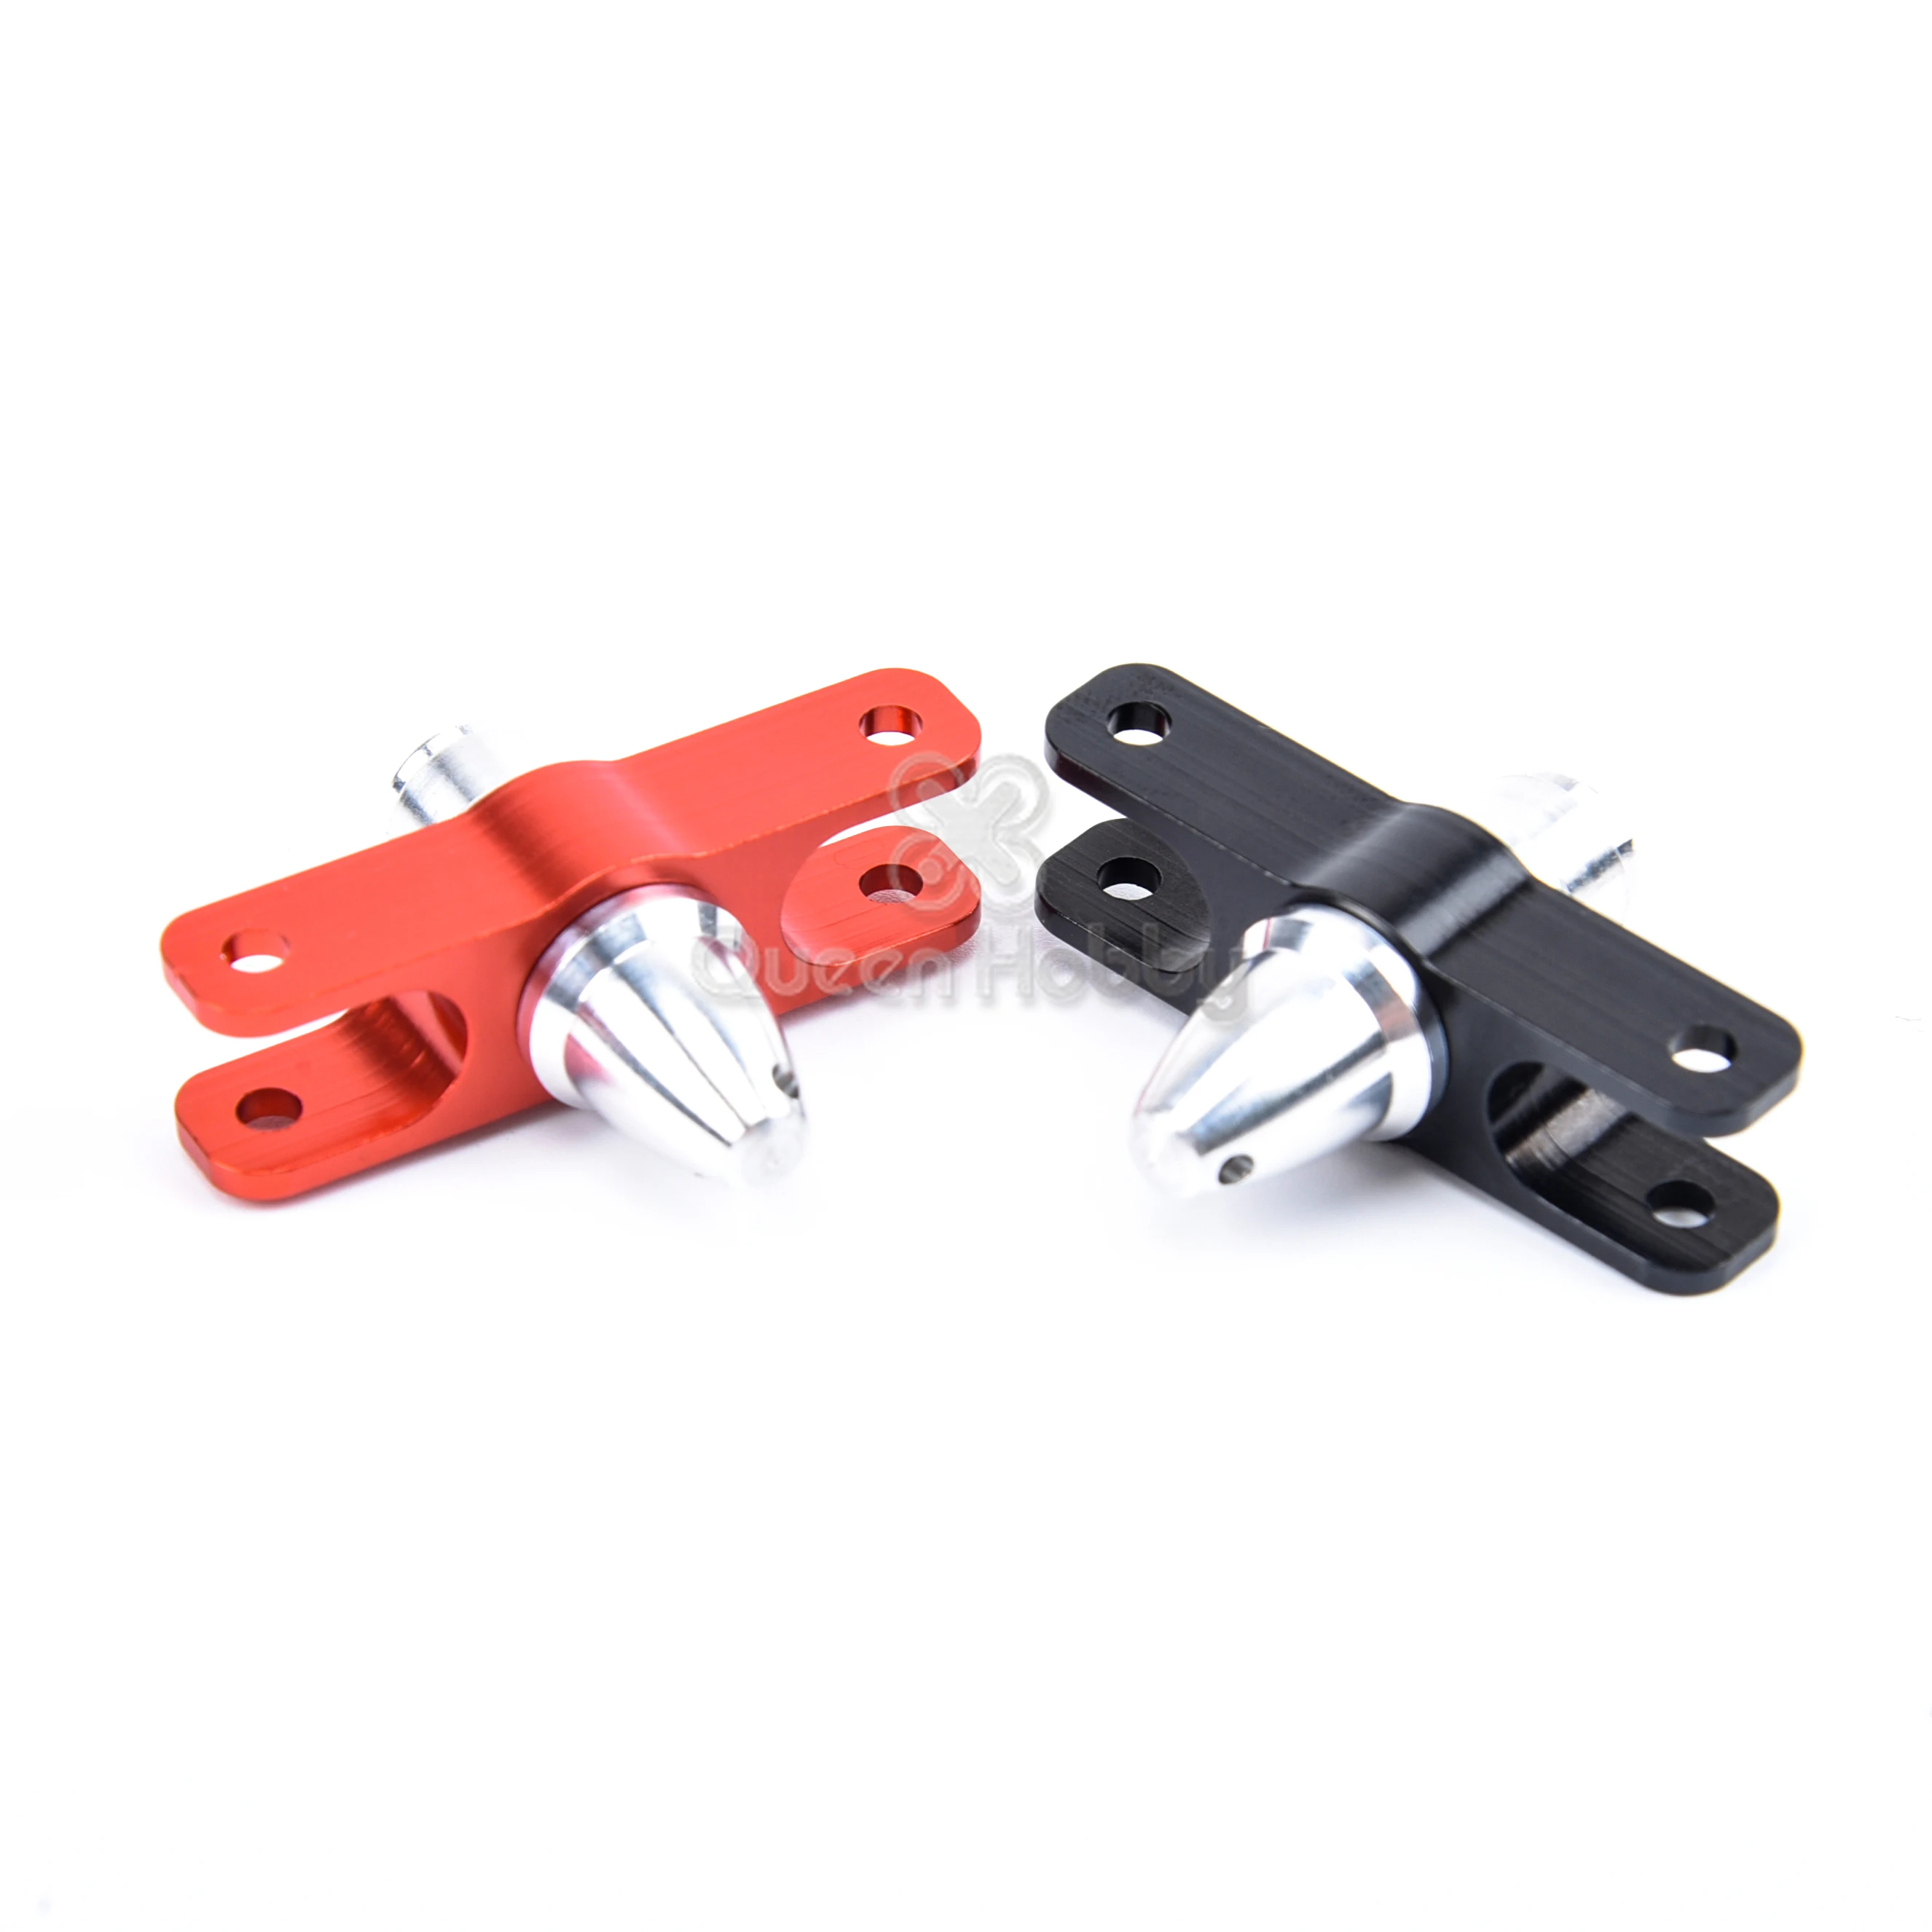 Details about   Folding Propeller Clip 5mm 6mm 8mm Props Adapter Thread Shaft for RC Airplane 